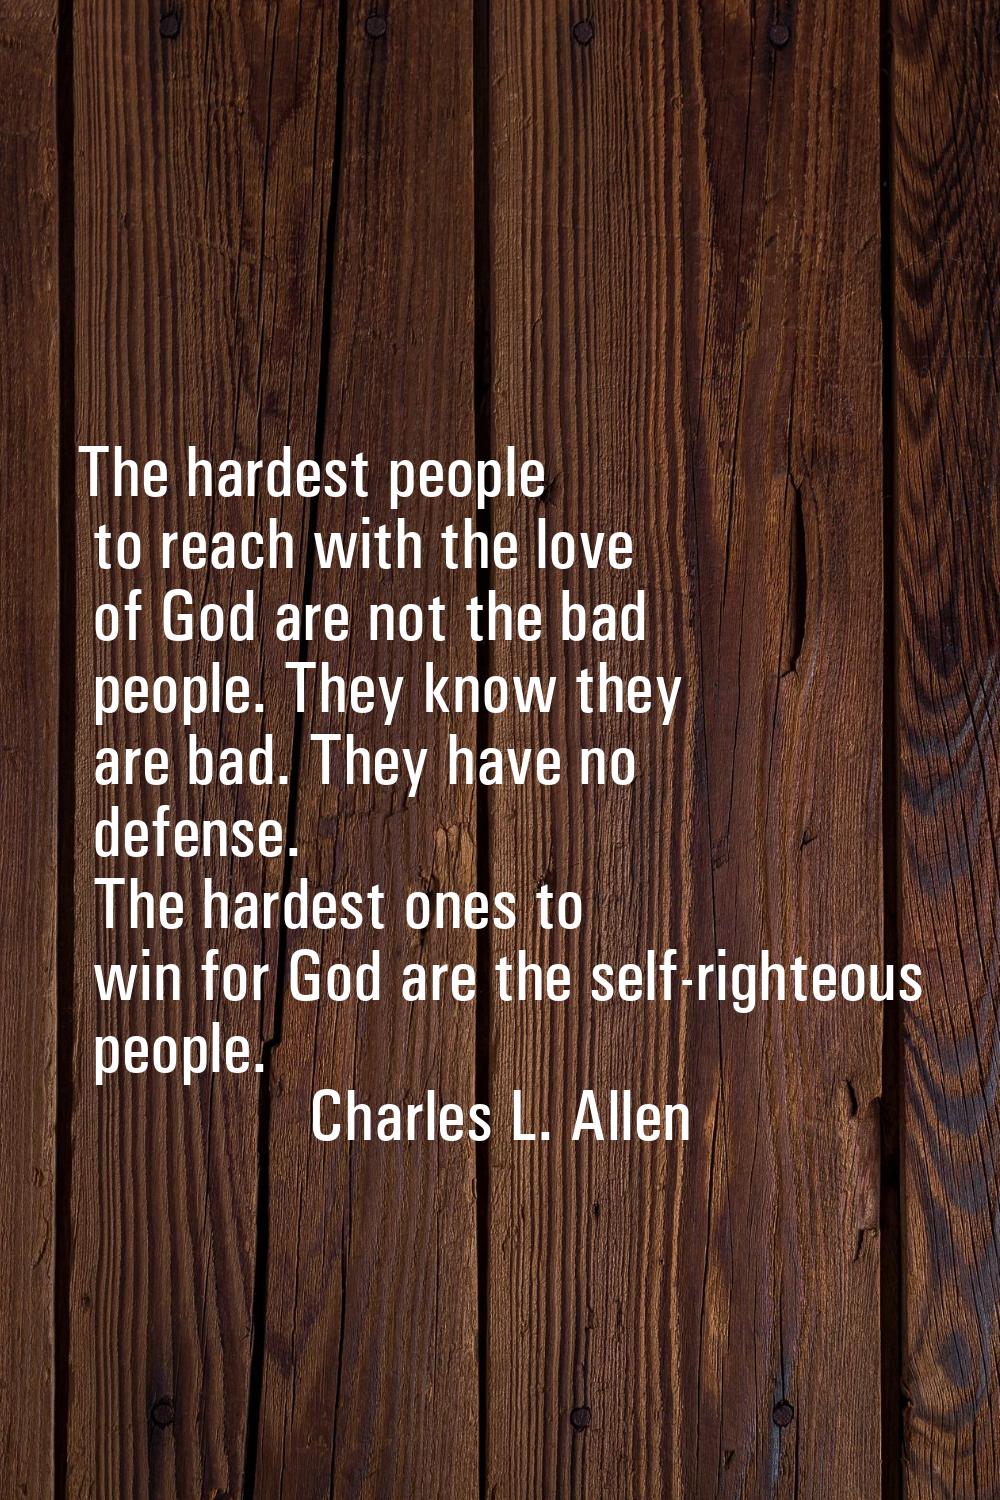 The hardest people to reach with the love of God are not the bad people. They know they are bad. Th